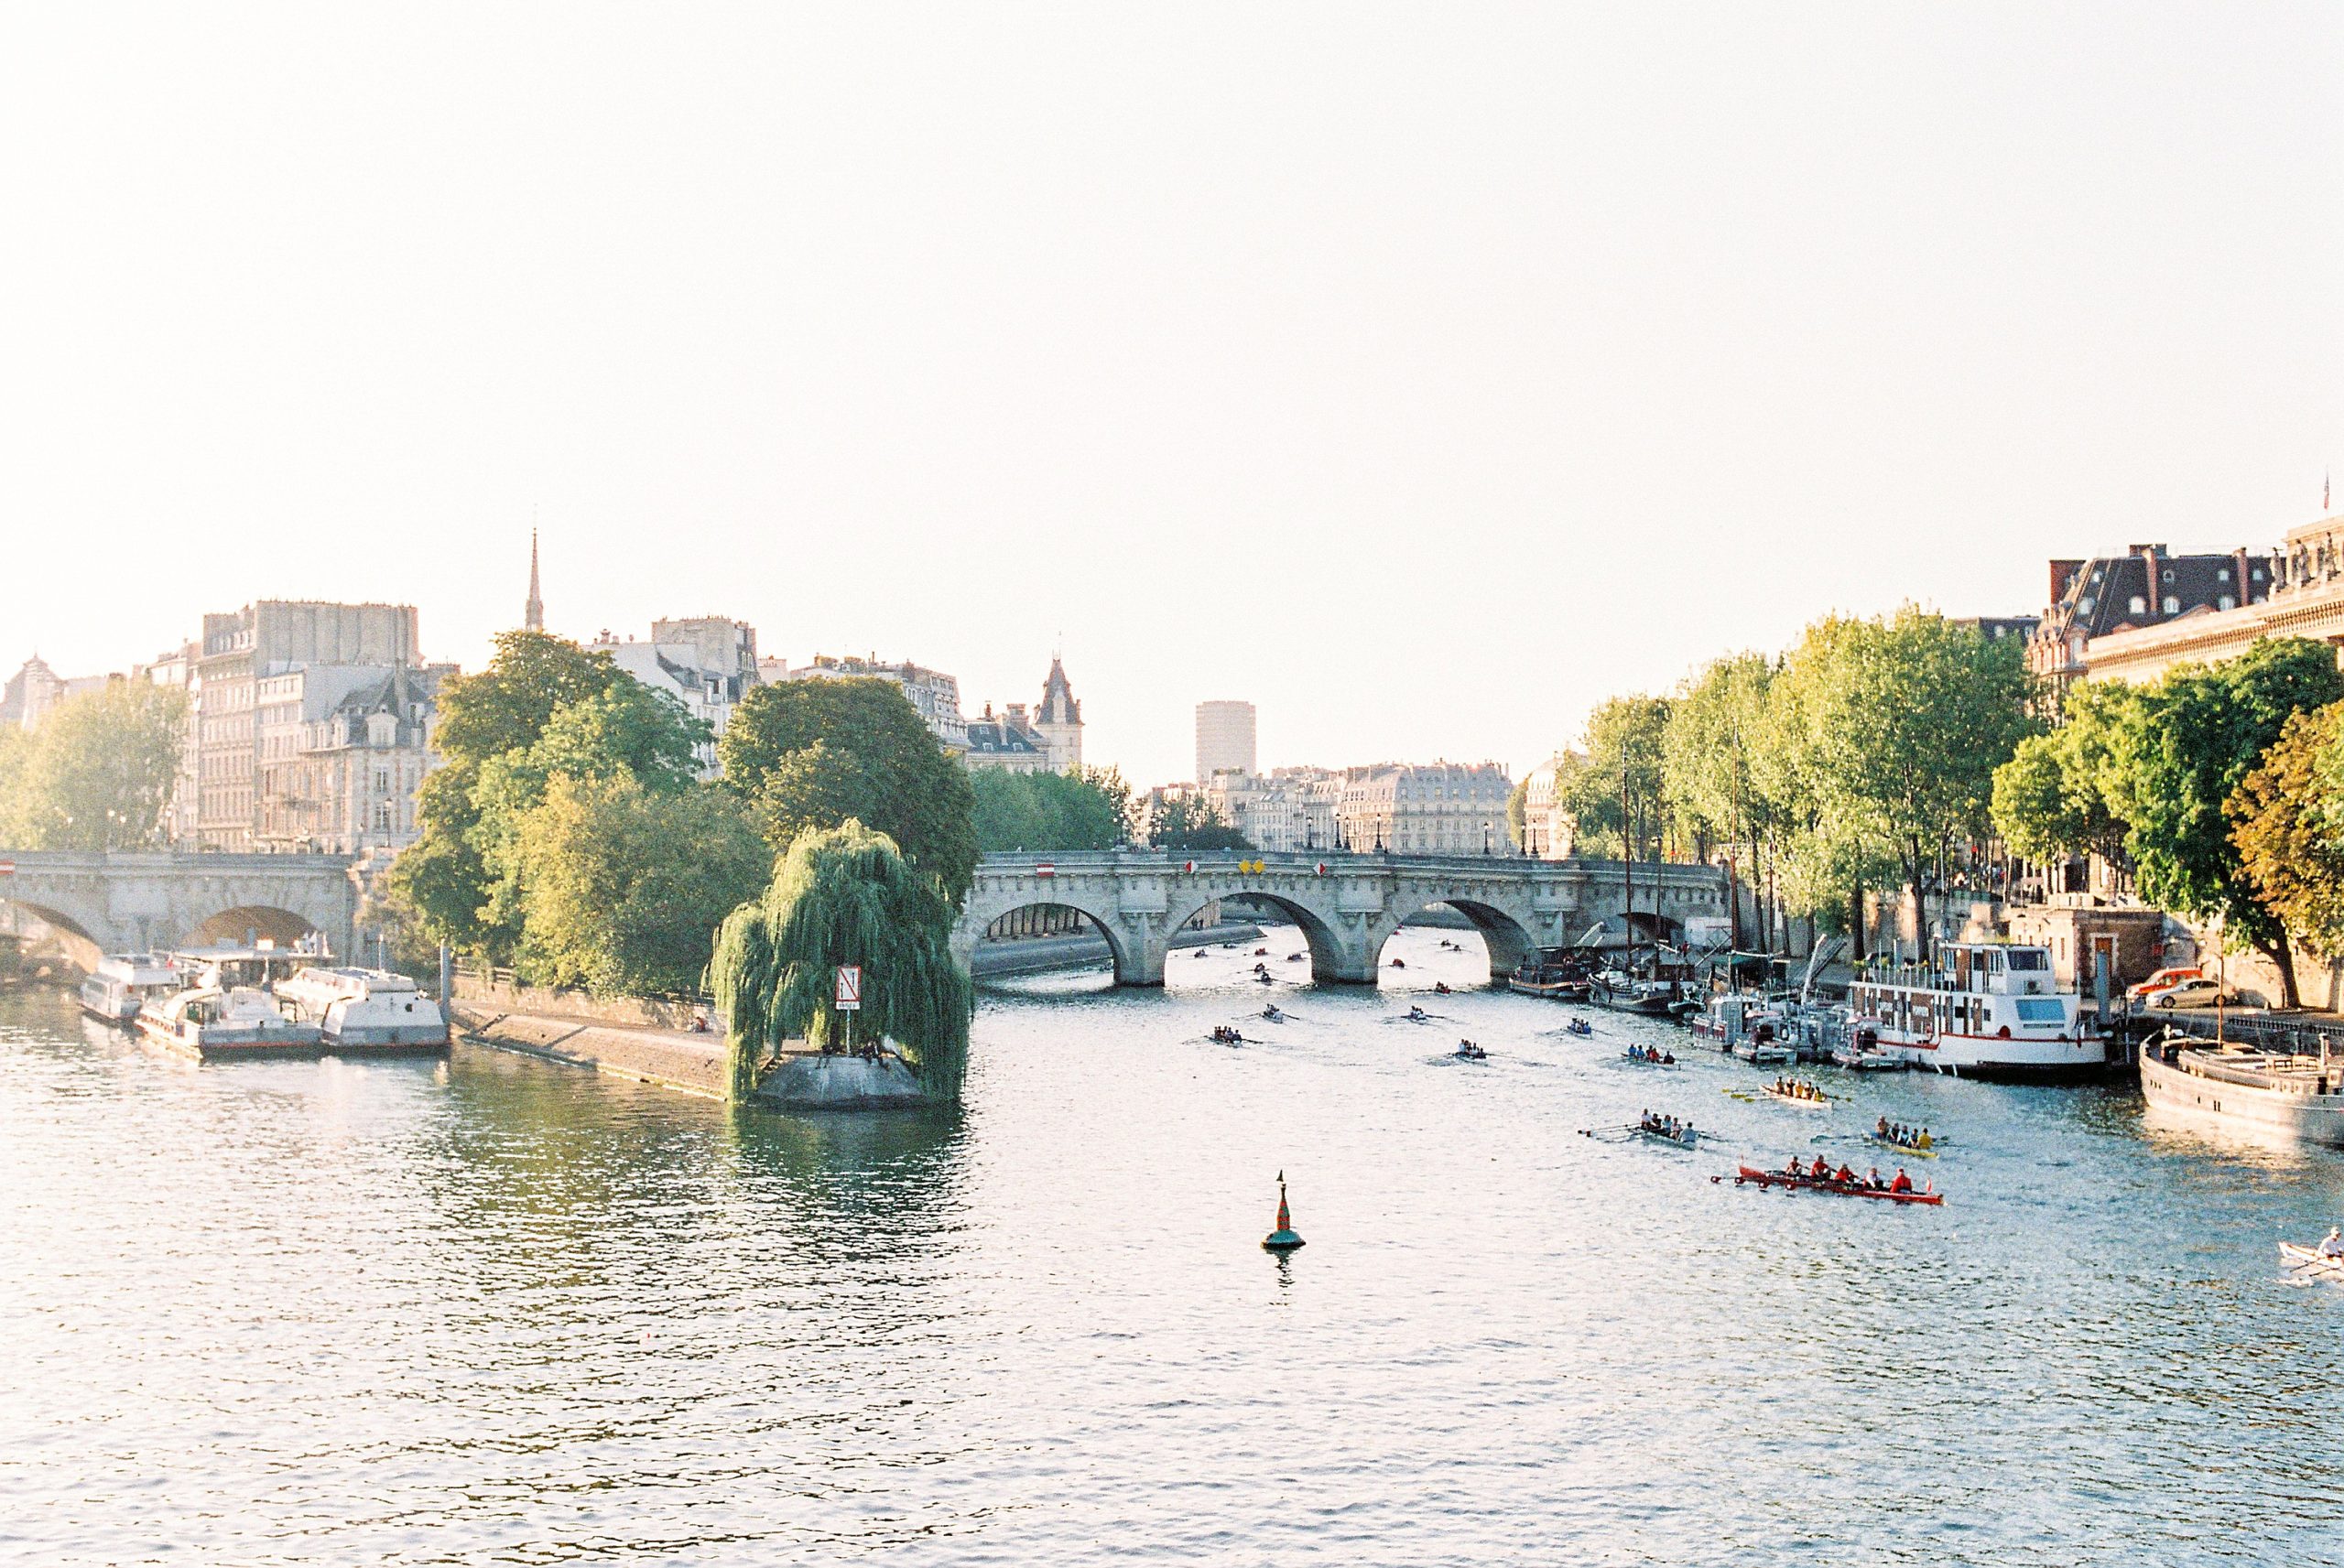 Pont Neuf and Île de la Cité are illuminated by morning light as the Seine glitters on a quiet morning in Paris.